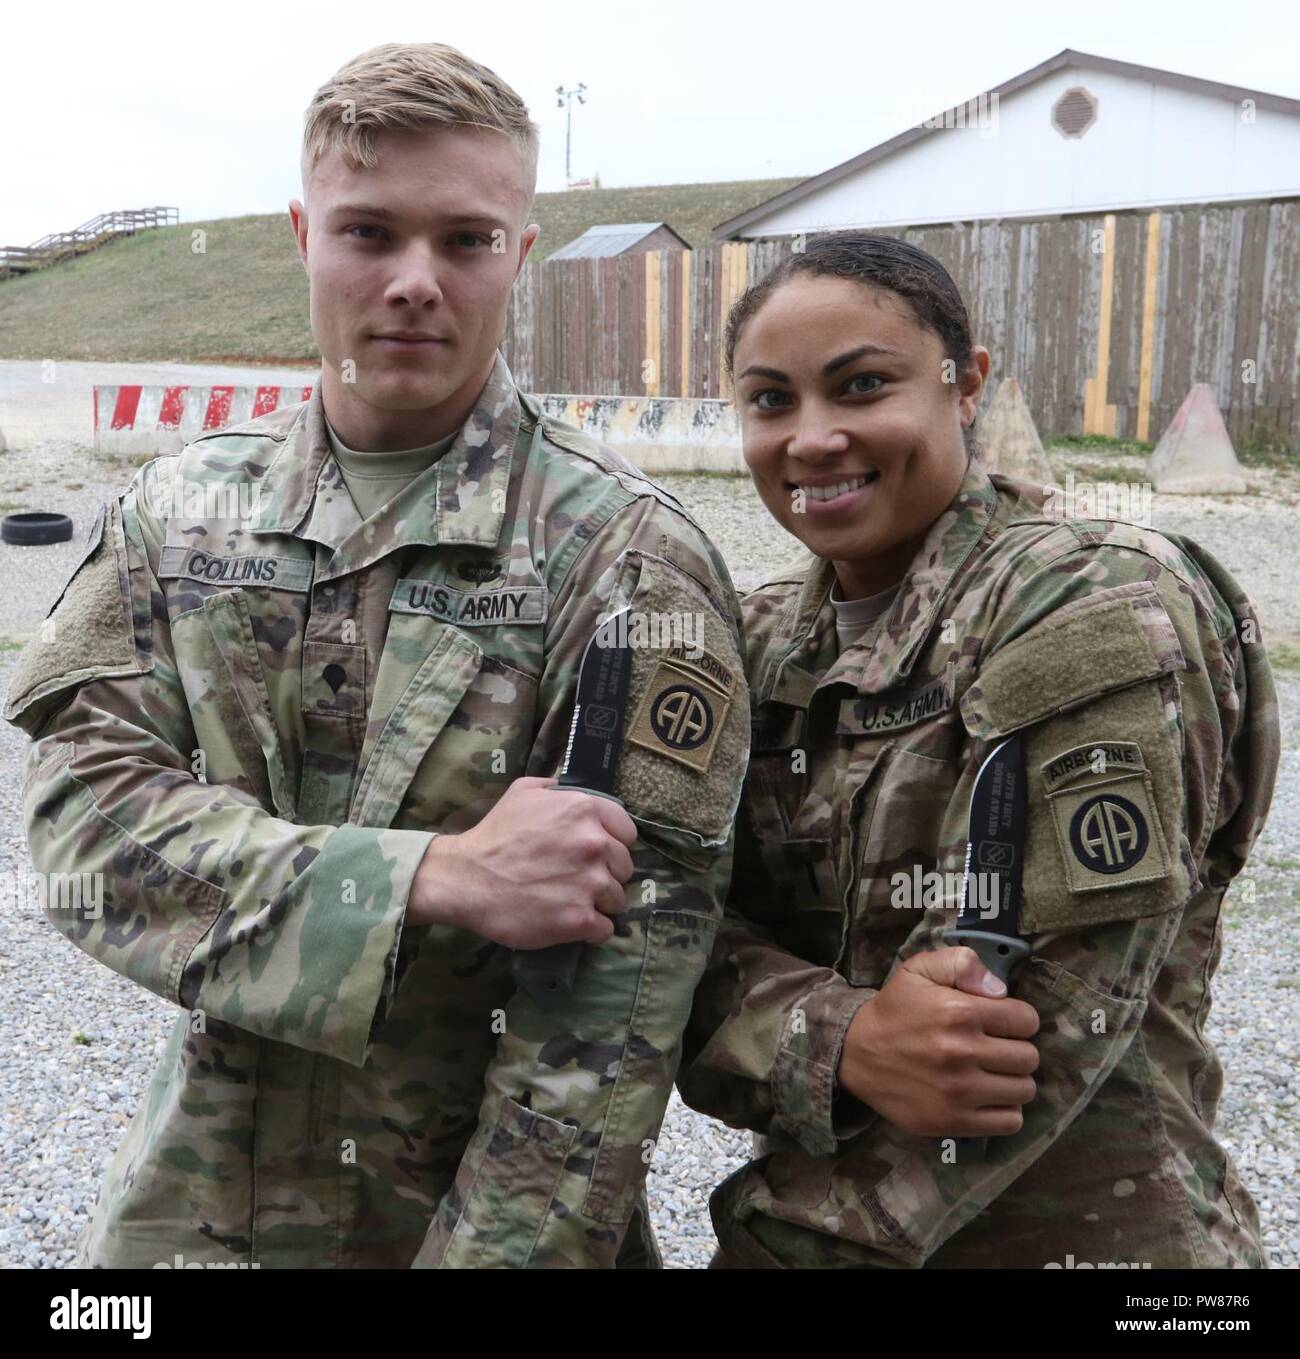 Spc. Elliot Collins and 1st Lt. Azura Lewis of the Liaison Monitoring Team out of Camp Bondsteel, Kosovo, pose with their combat knives awarded to them for winning the Bowie Challenge, September 28, 2017, at Camp Bondsteel, Kosovo. Stock Photo